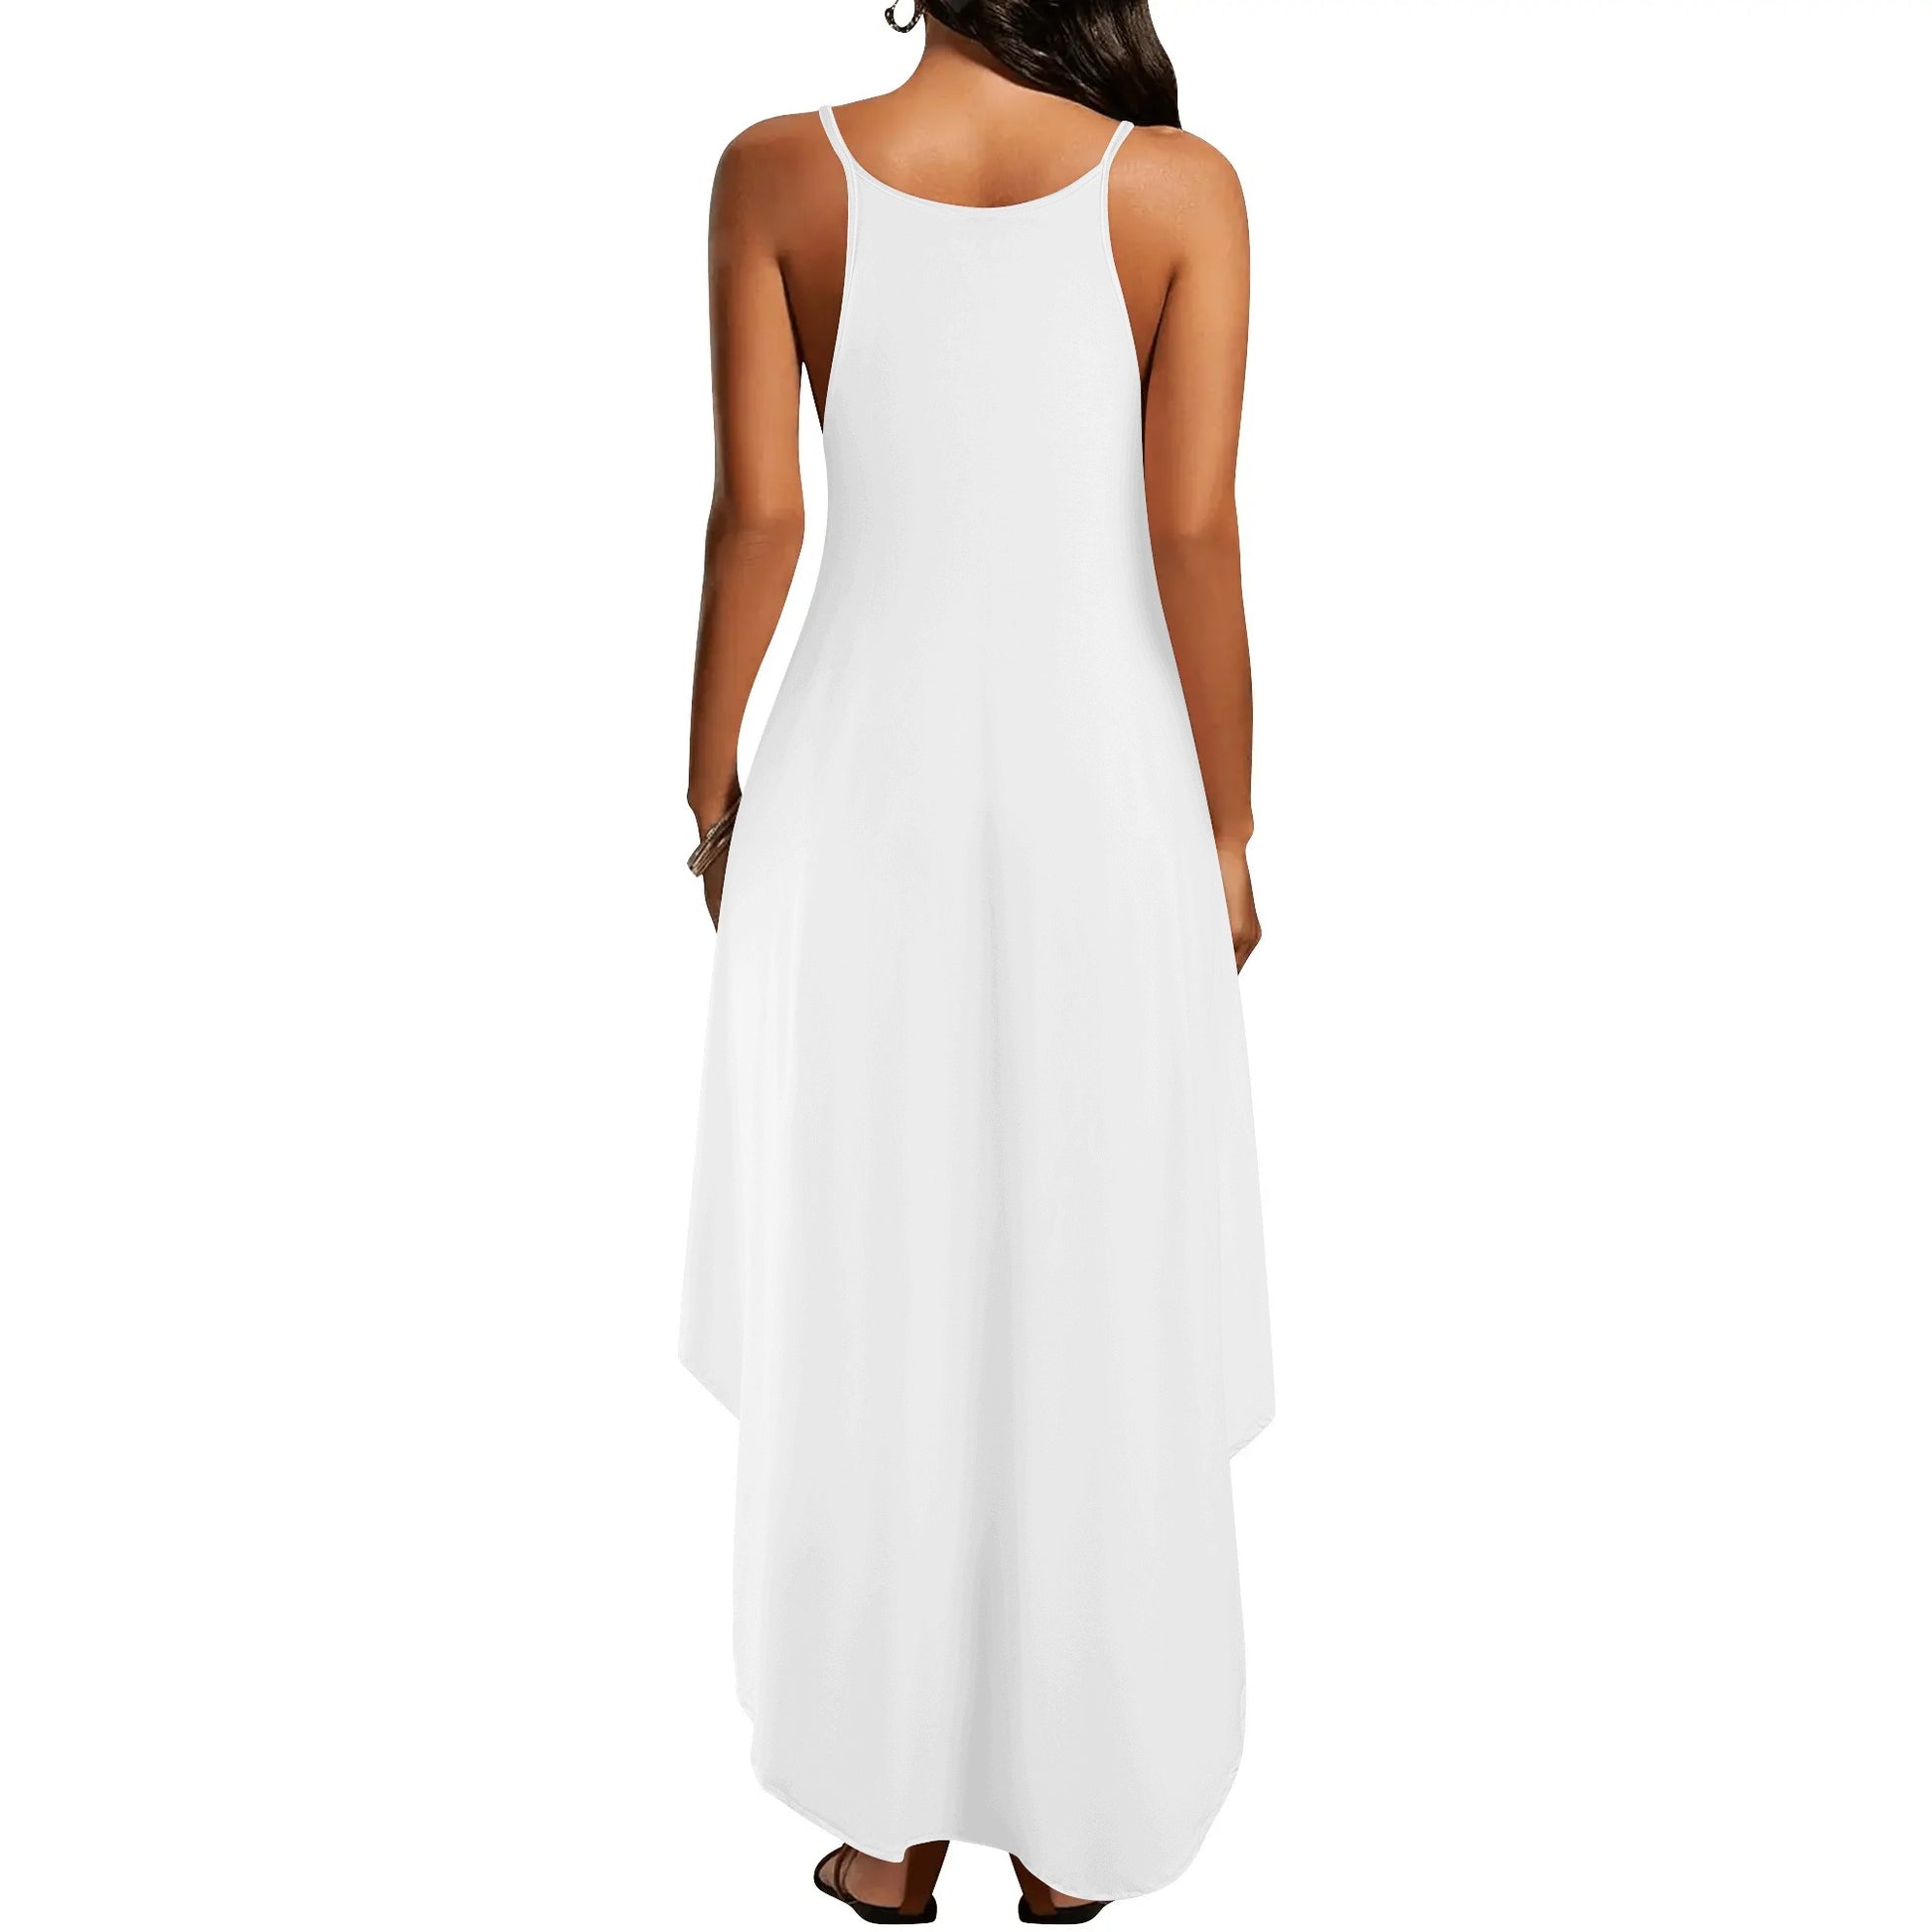 Condemned By Sin Freed By The Cross Womens Christian Elegant Sleeveless Summer Maxi Dress popcustoms